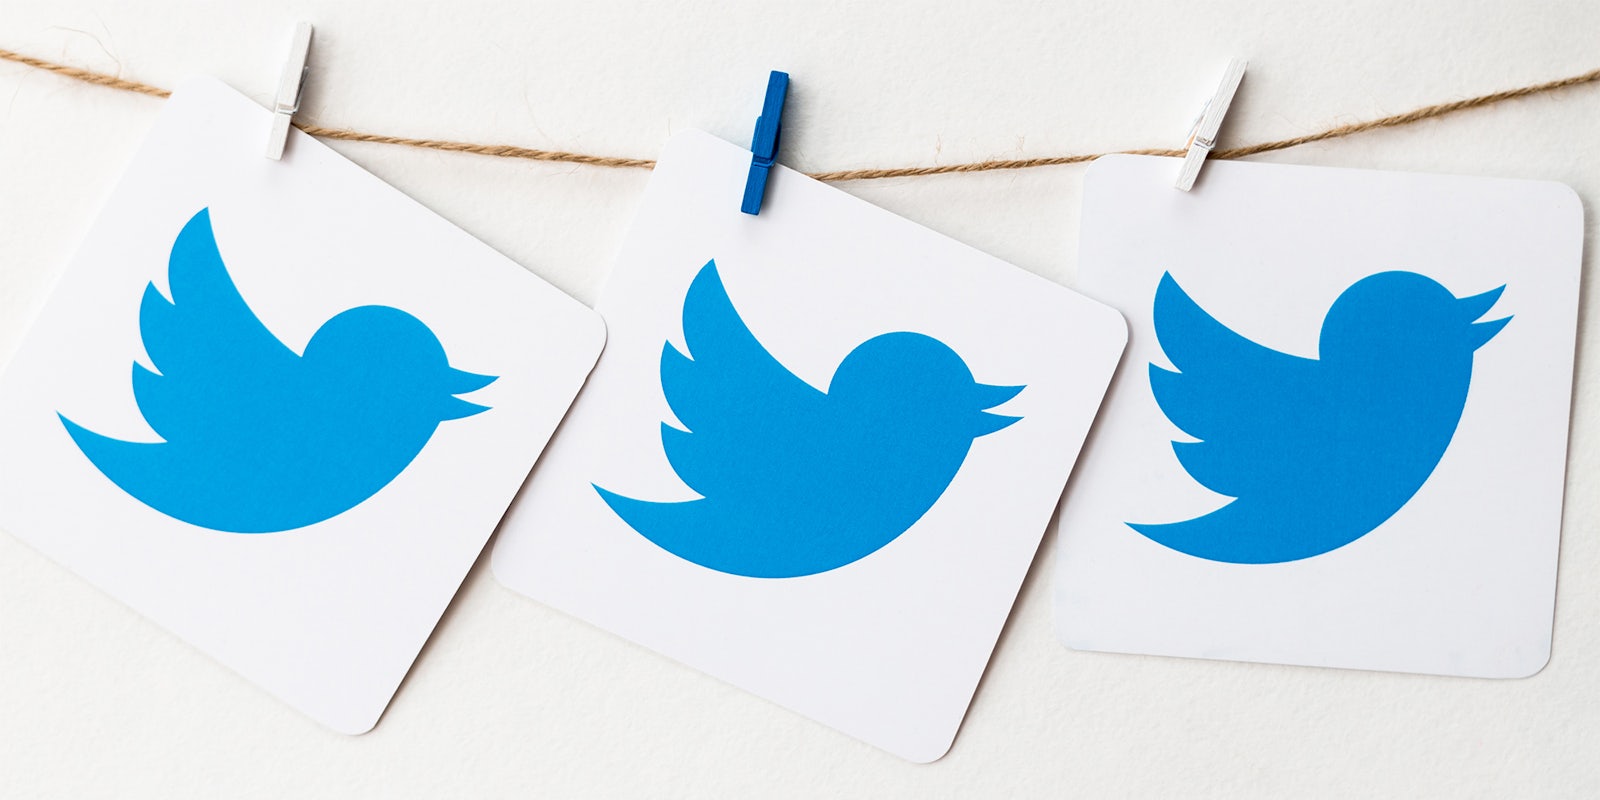 twitter logos on cardboard, hanging from a string